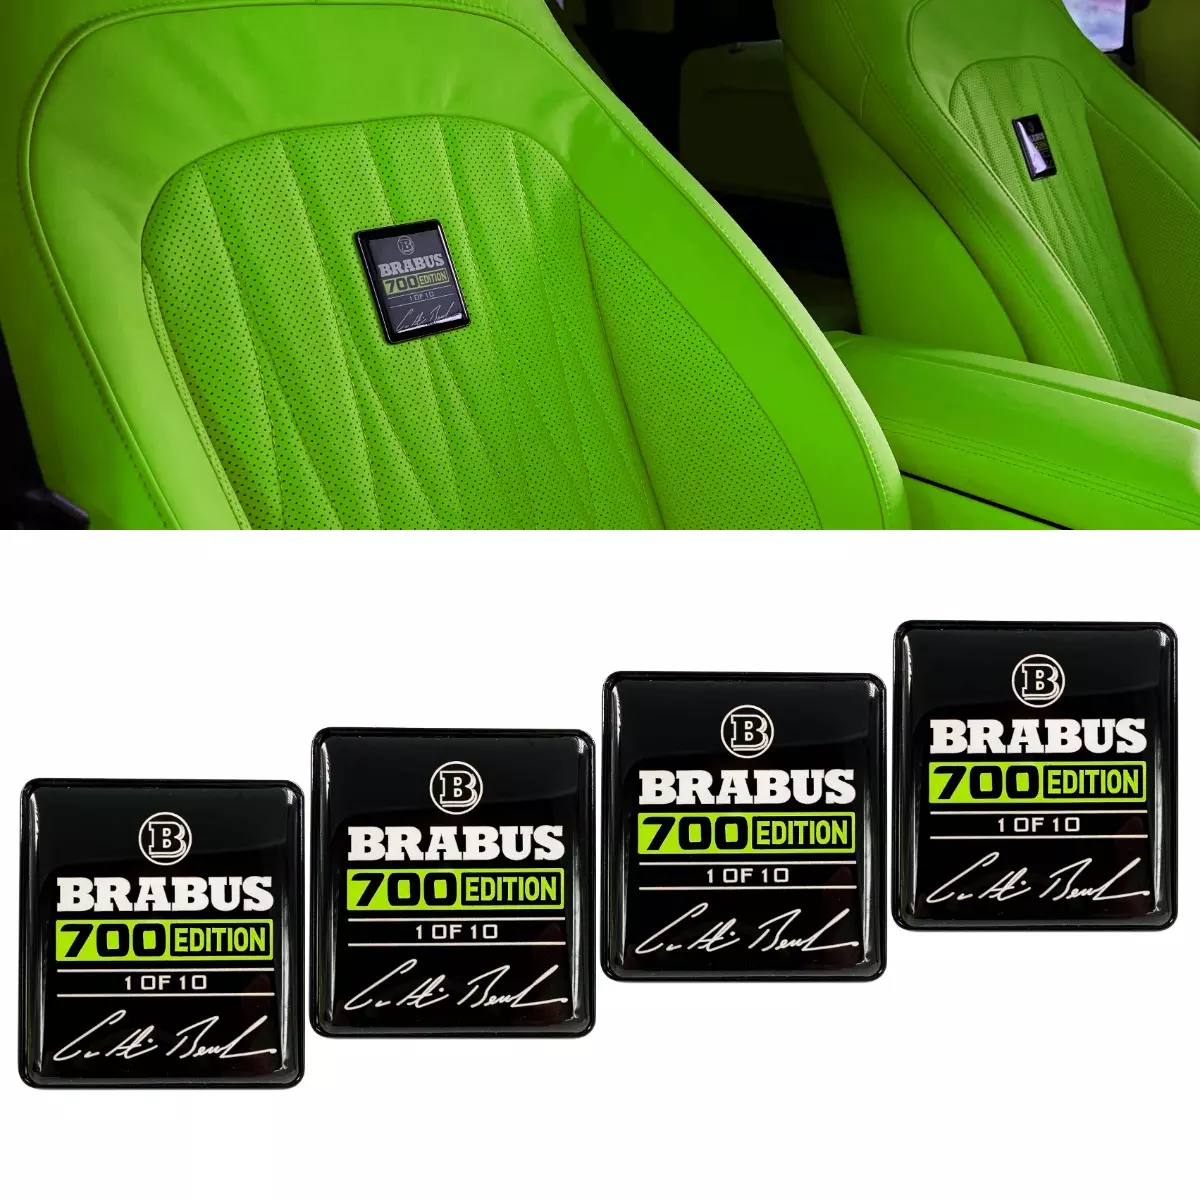 Brabus 700 Edition 1 of 10 Green Seat Emblems Set for Mercedes-Benz W463A